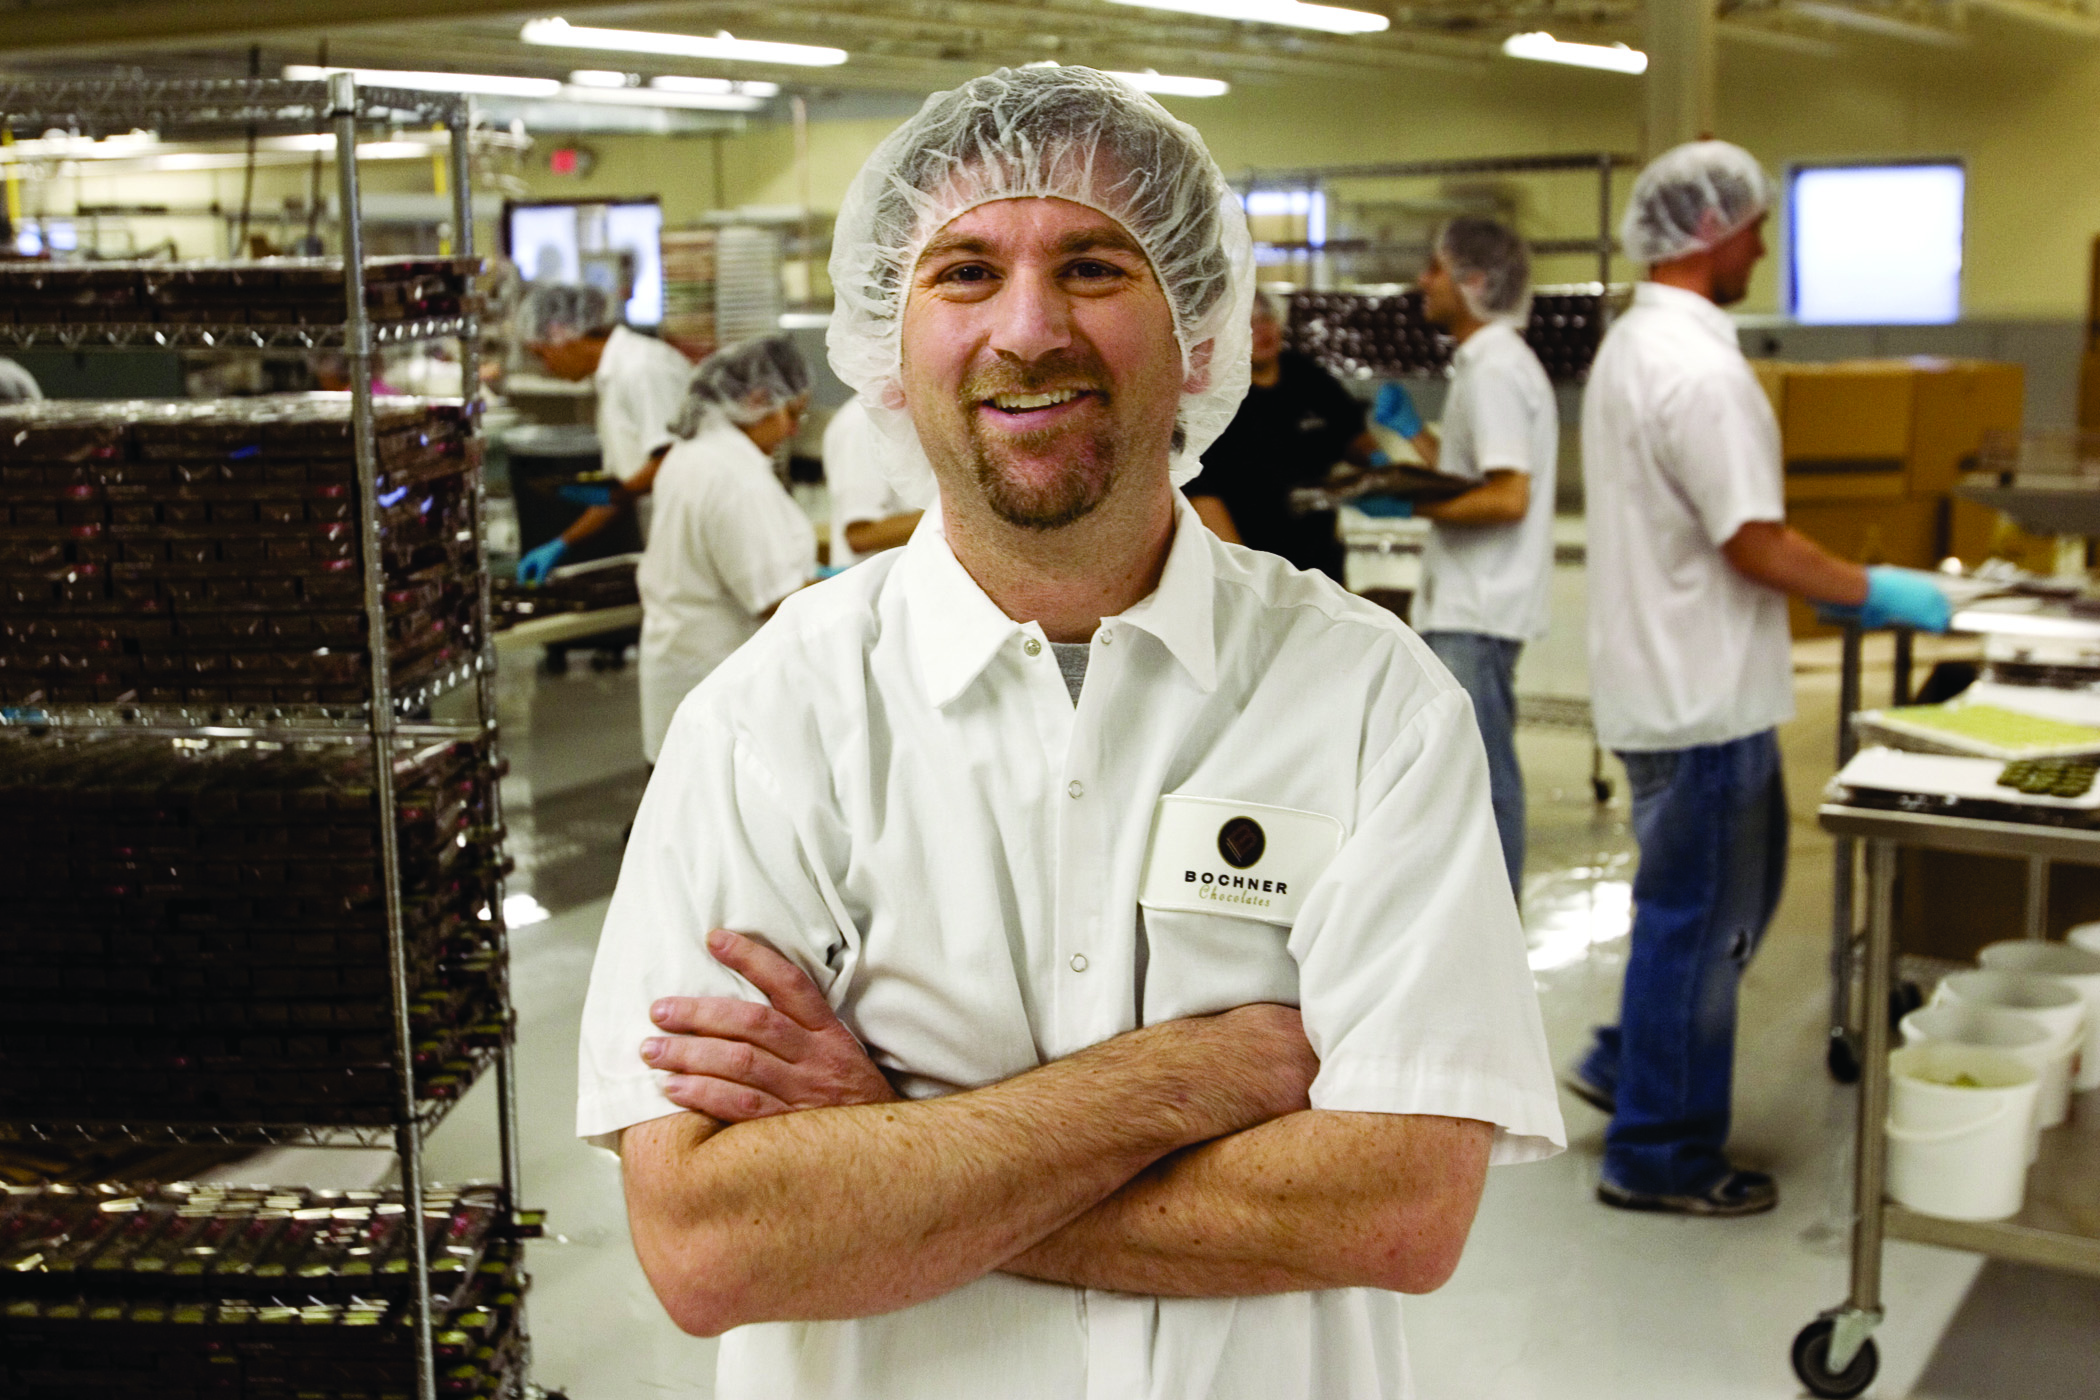 Former Bochner Chocolates president, Eric Bochner, stands in the company’s now closed Iowa City manufacturing center in 2008. CREDIT CBJ